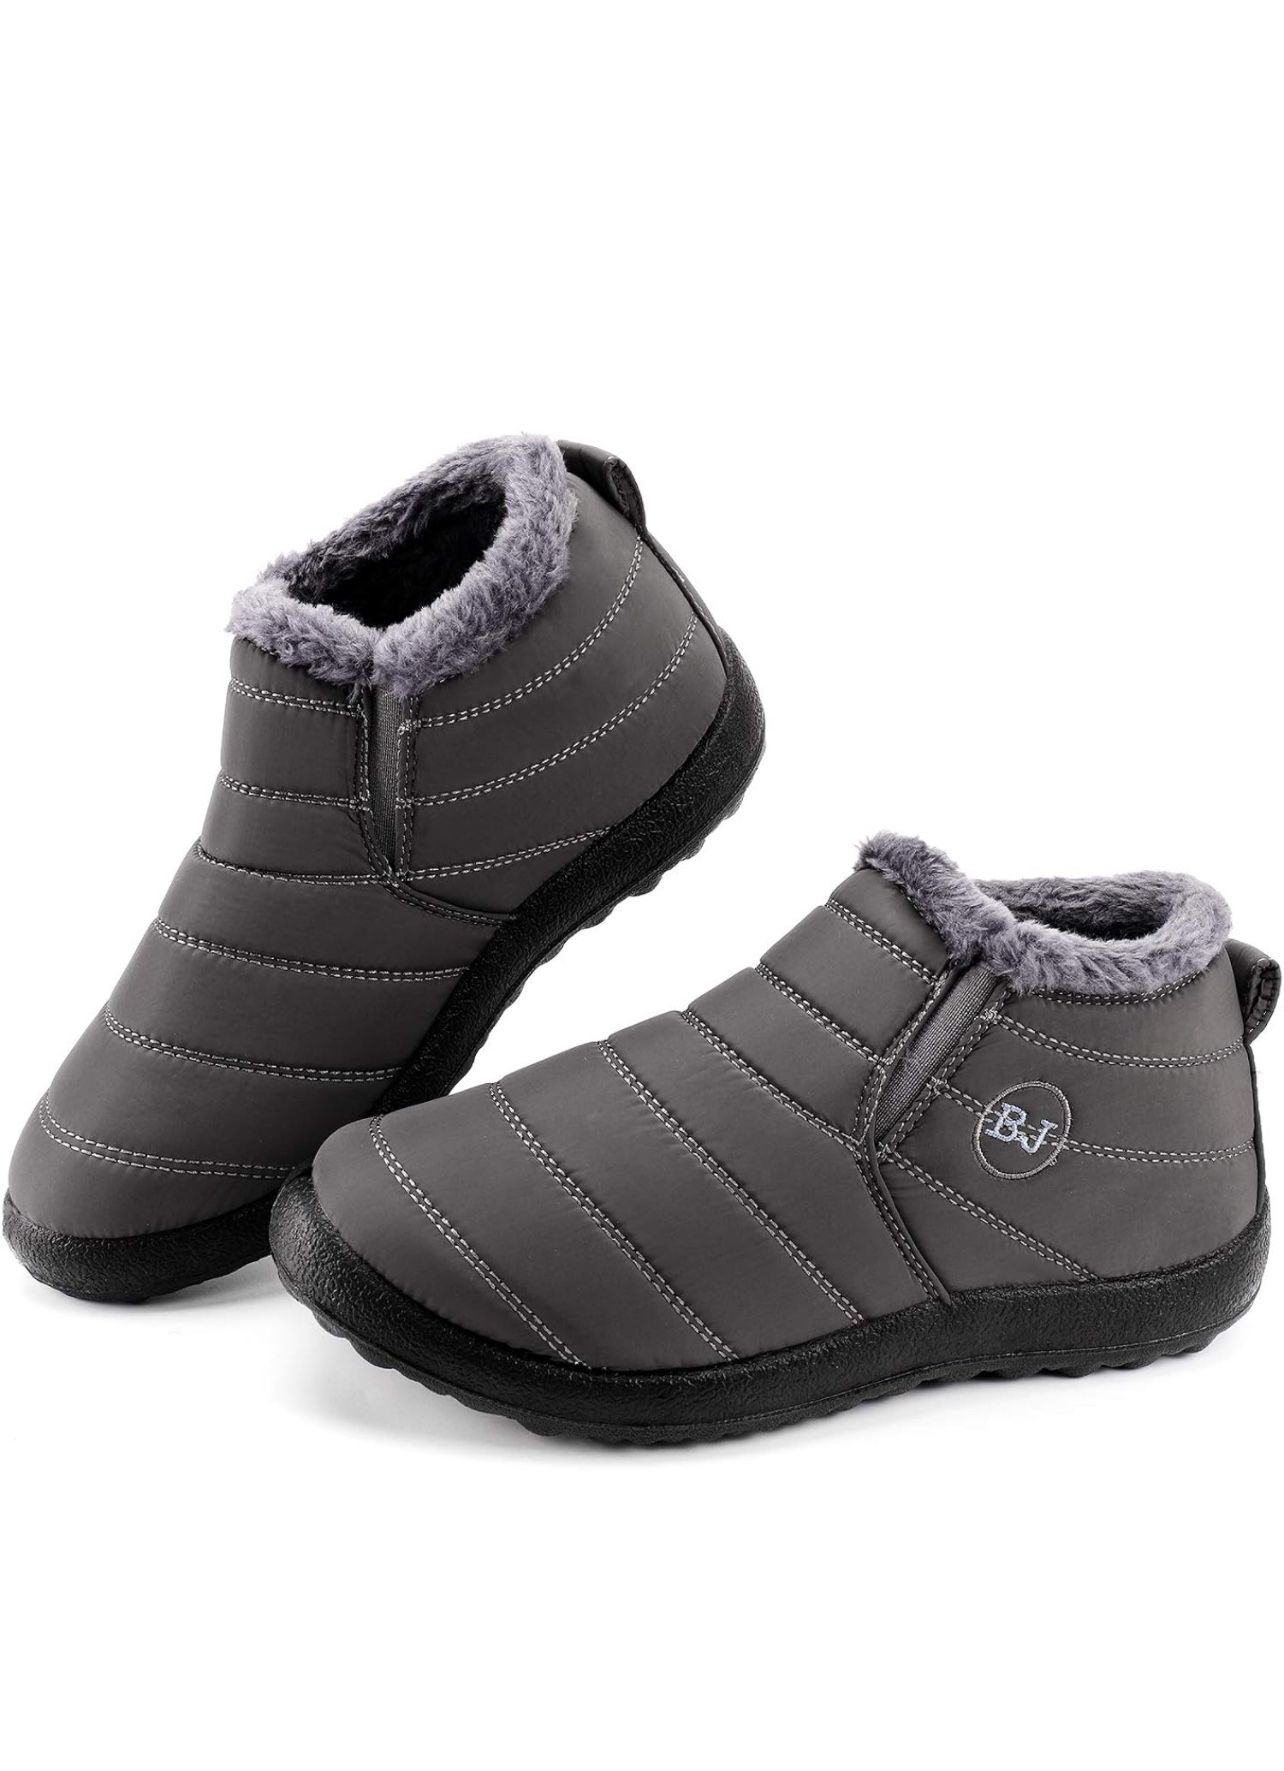  Womens Snow Boots Winter Warm Booties Fur Lined Anti-Slip Ankle Boots Outdoor 